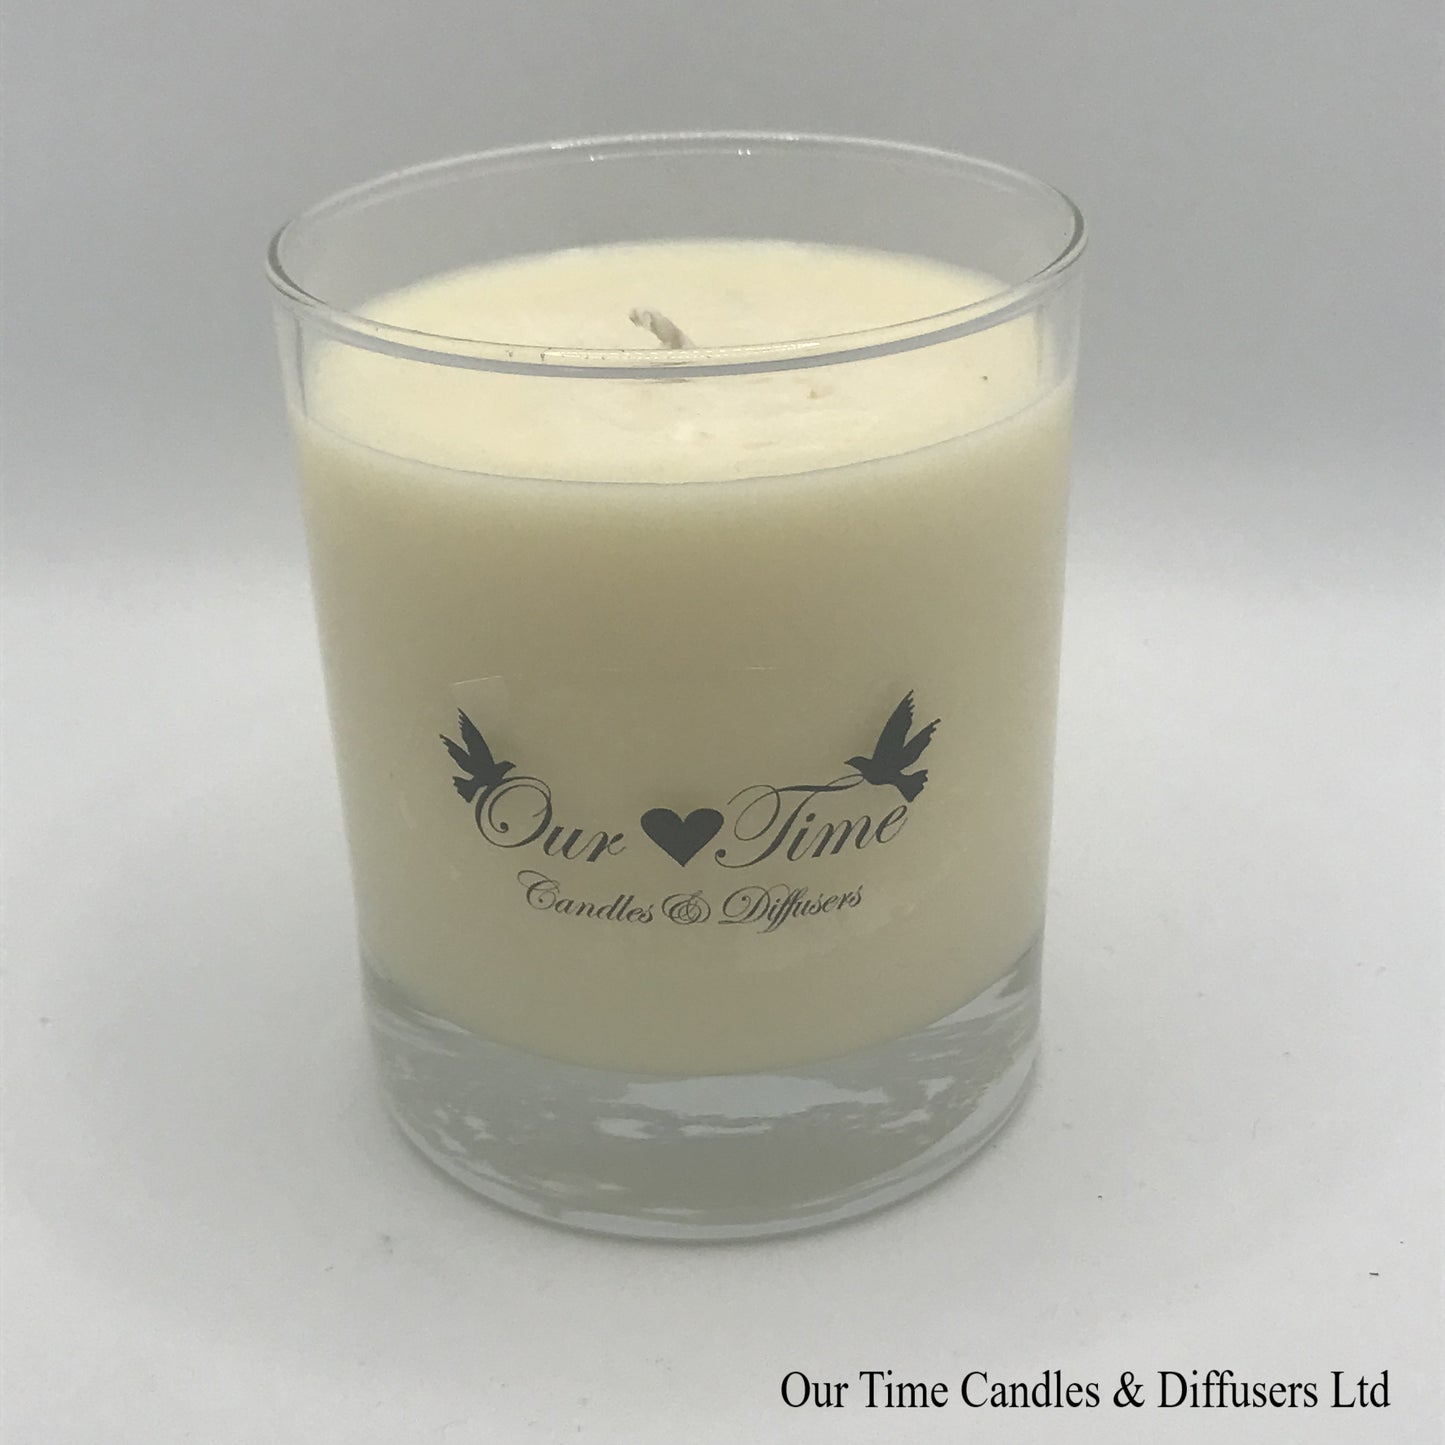 Tropical Fruit scented wax filled candle